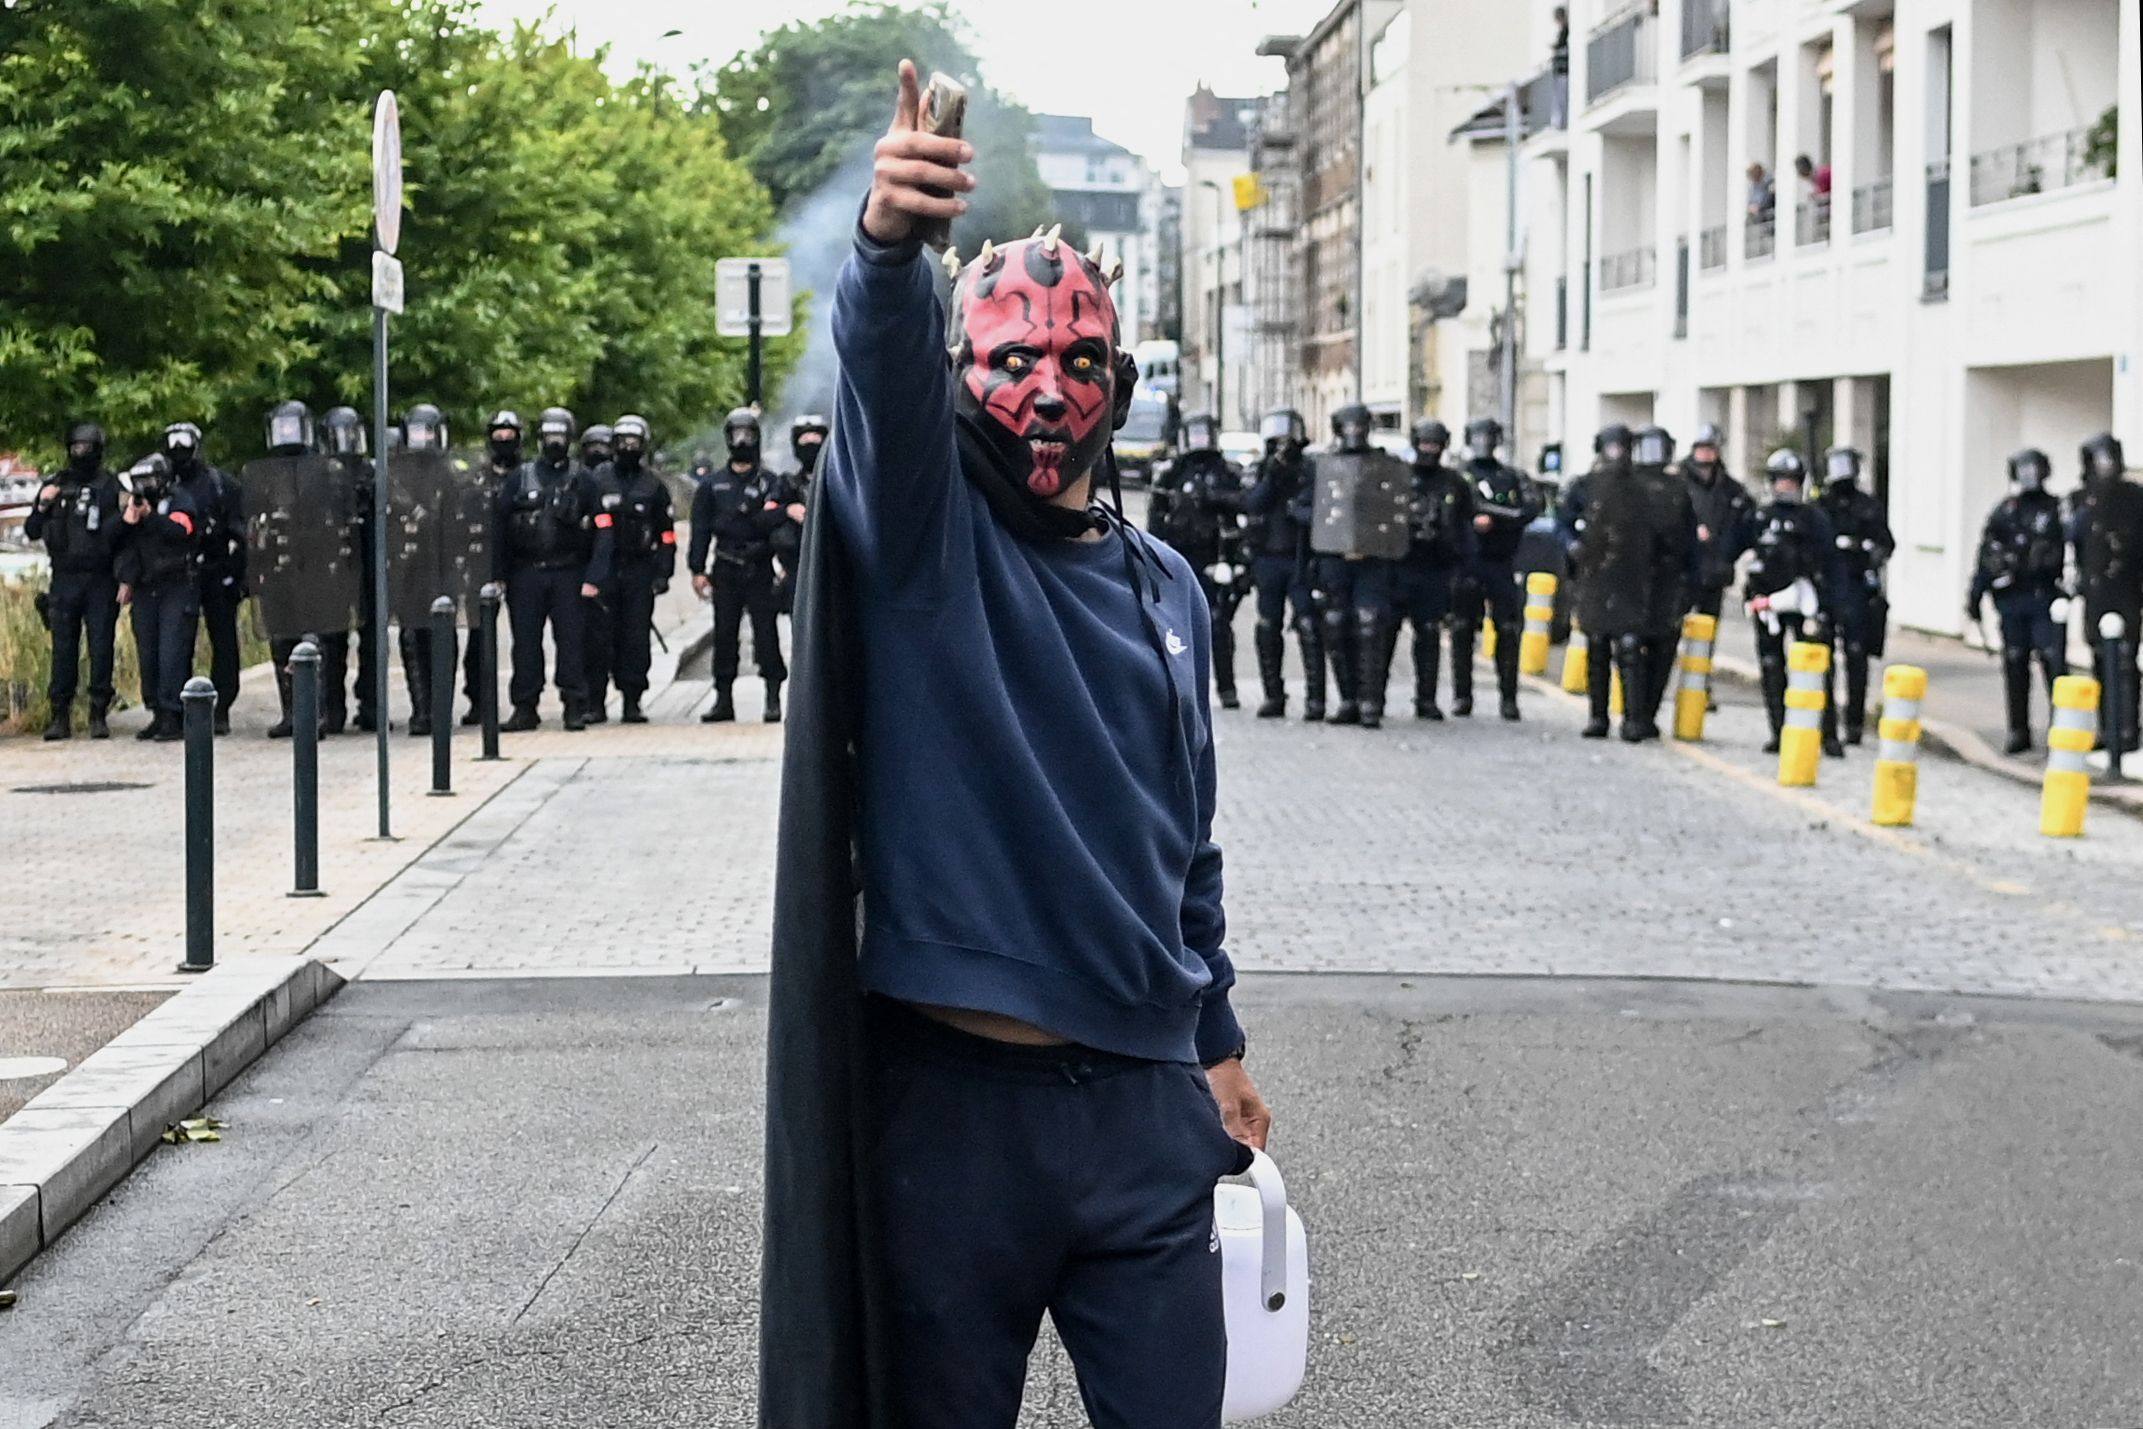 A protestor in Nantes, western France demonstrates against the far-right National Rally party after their success in the European elections. Photo: AFP